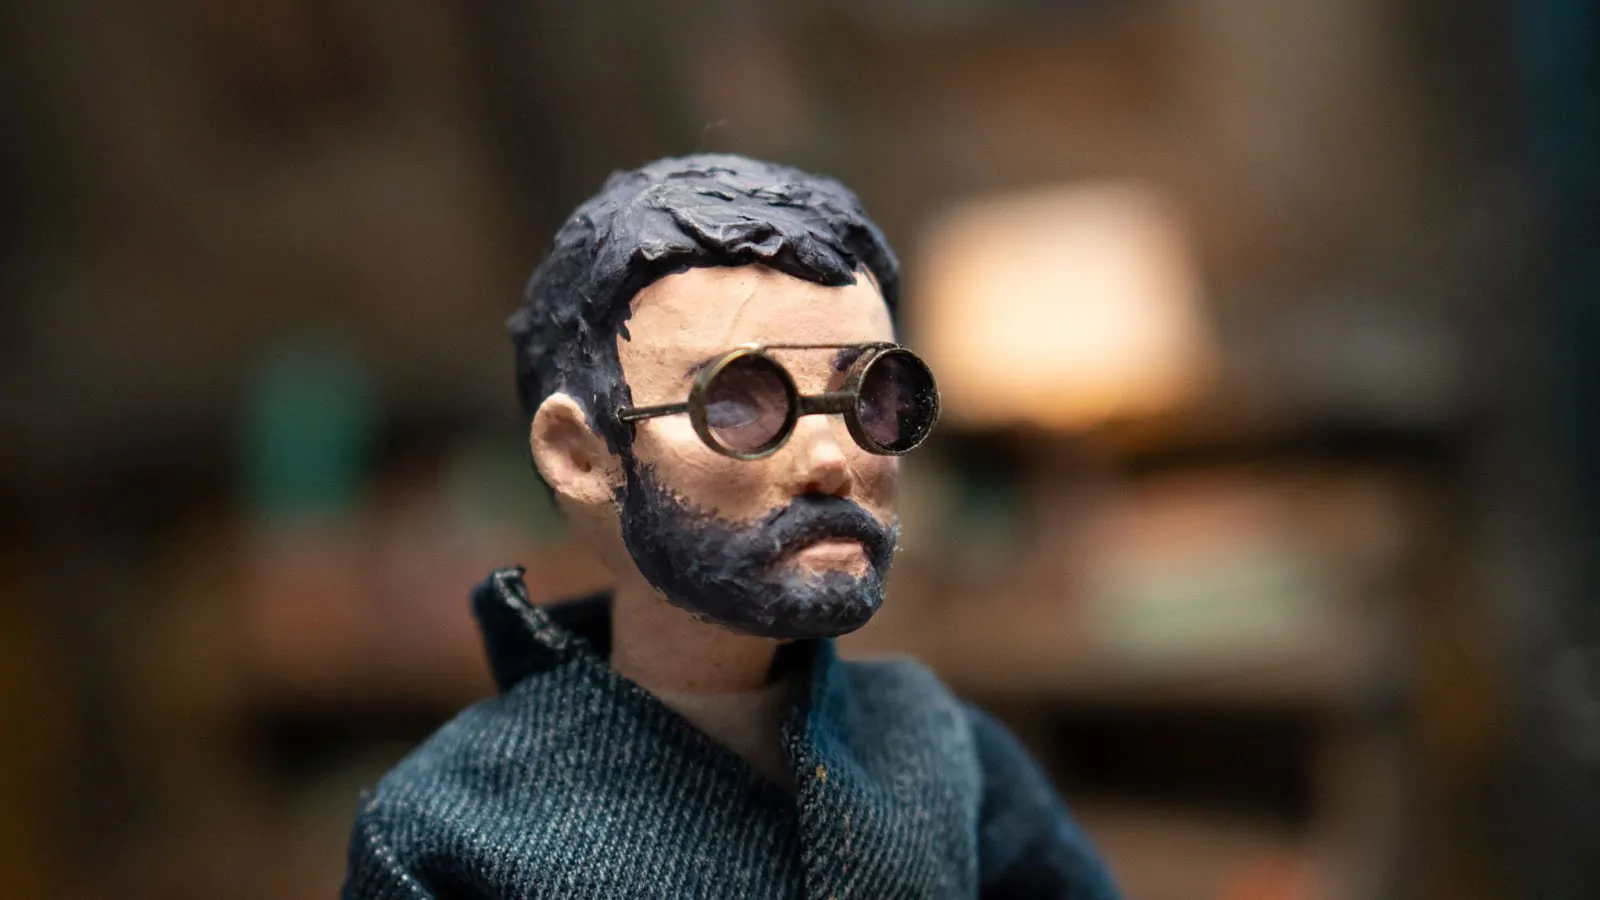 Eels share stop-motion animated music video for ‘Earth To Dora’